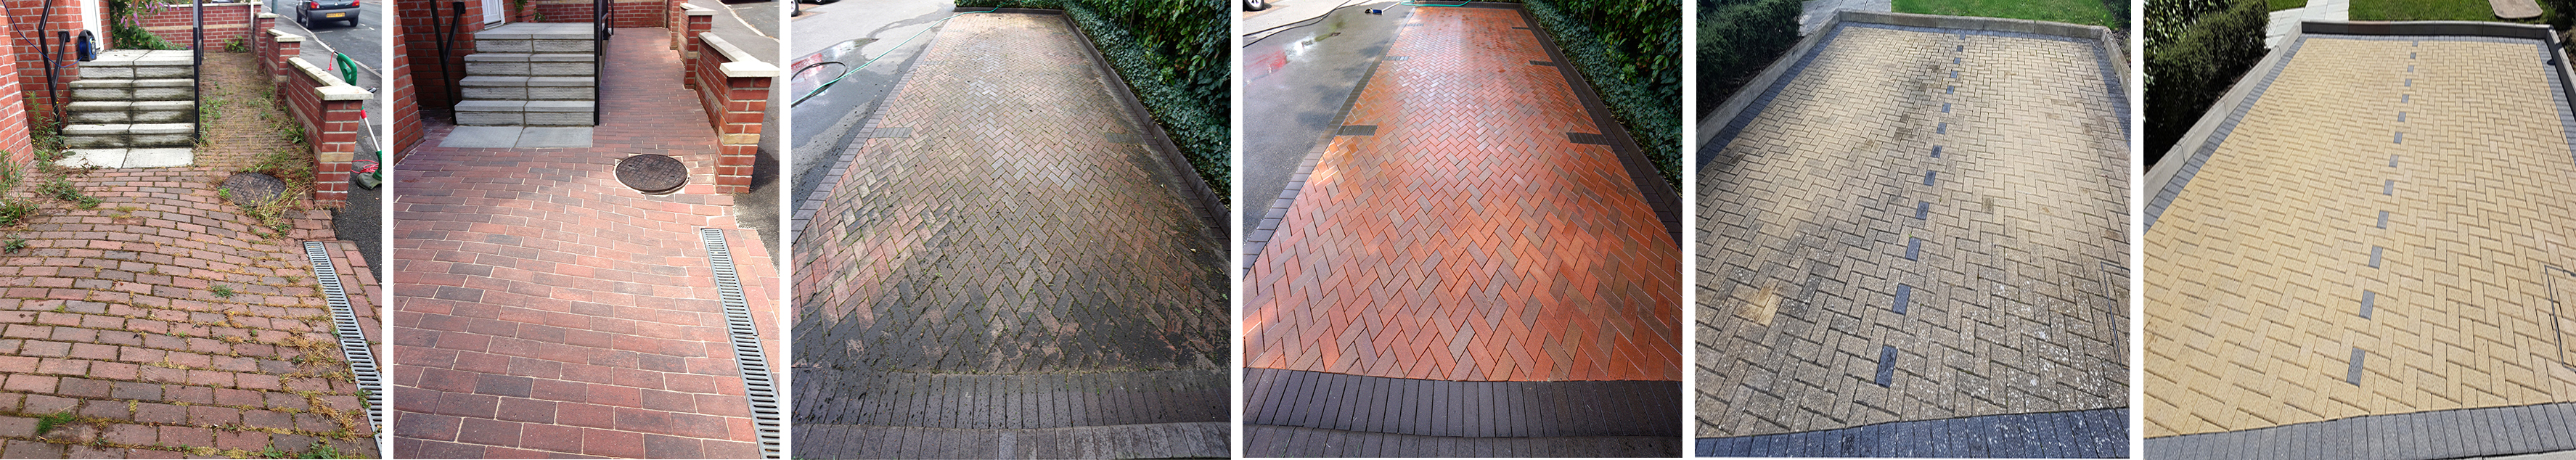 Driveway Cleaning Services in Ferndown, Dorset